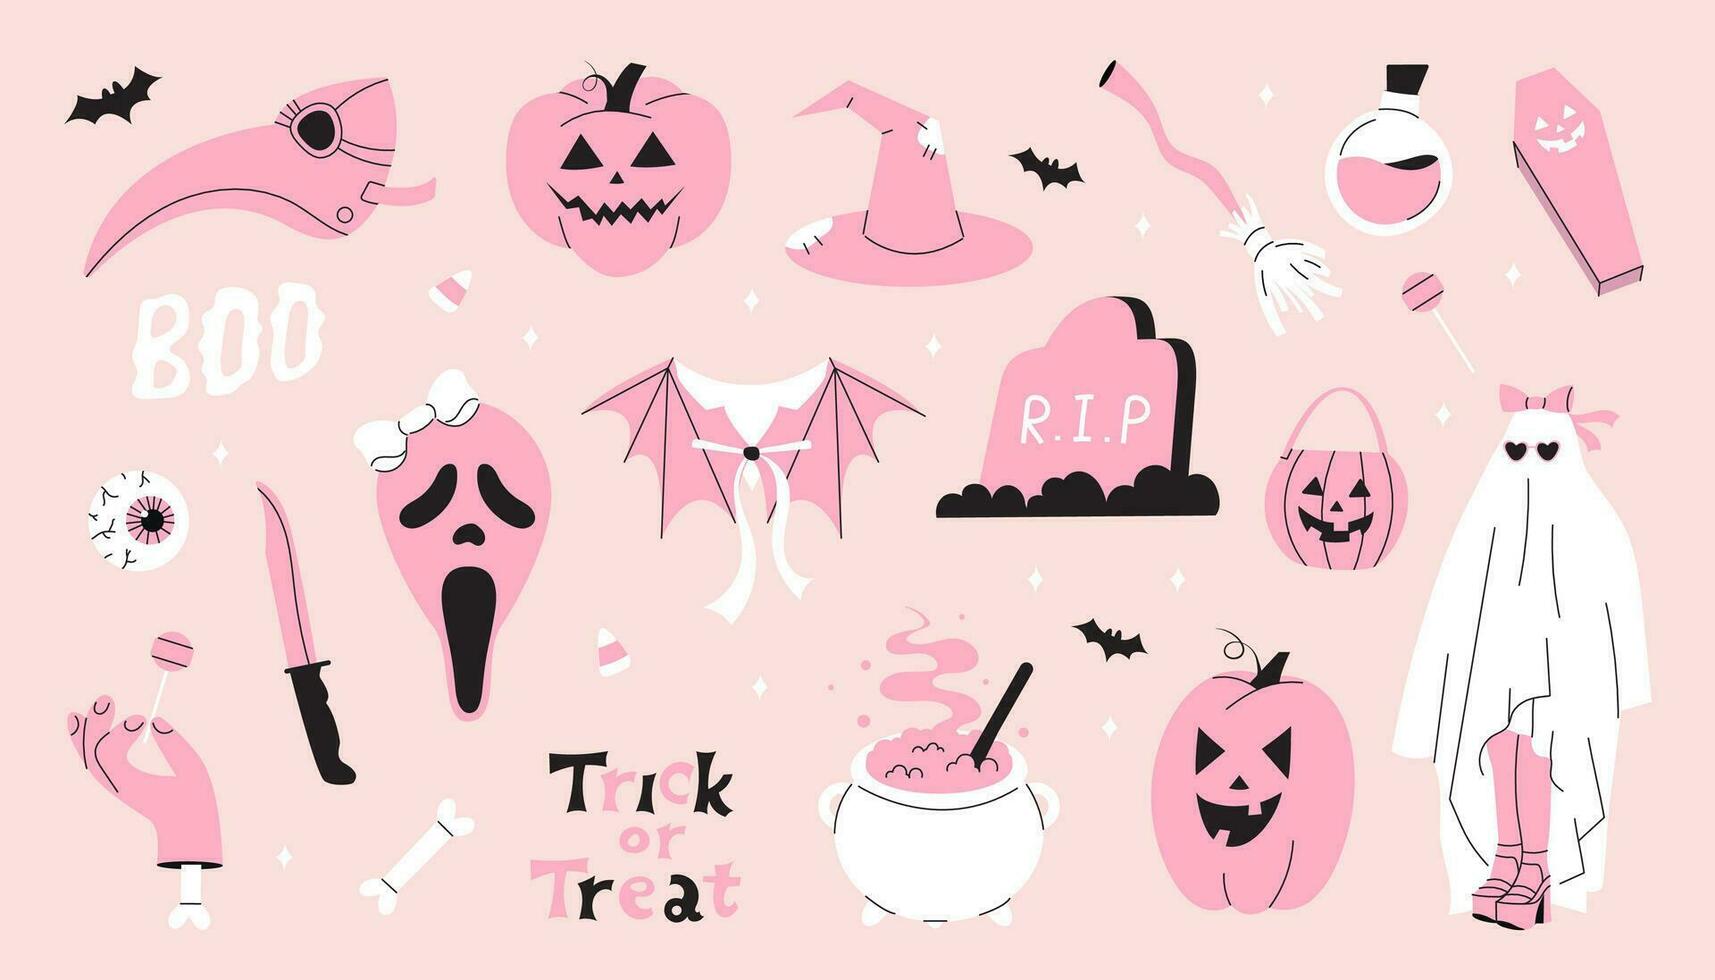 Pink set of Halloween different stickers. Isolated decorative elements in hand-drawn style ghost, mask, knife, witch's cauldron, eye, pumpkin, bat. Vector stock illustration on a pink background.